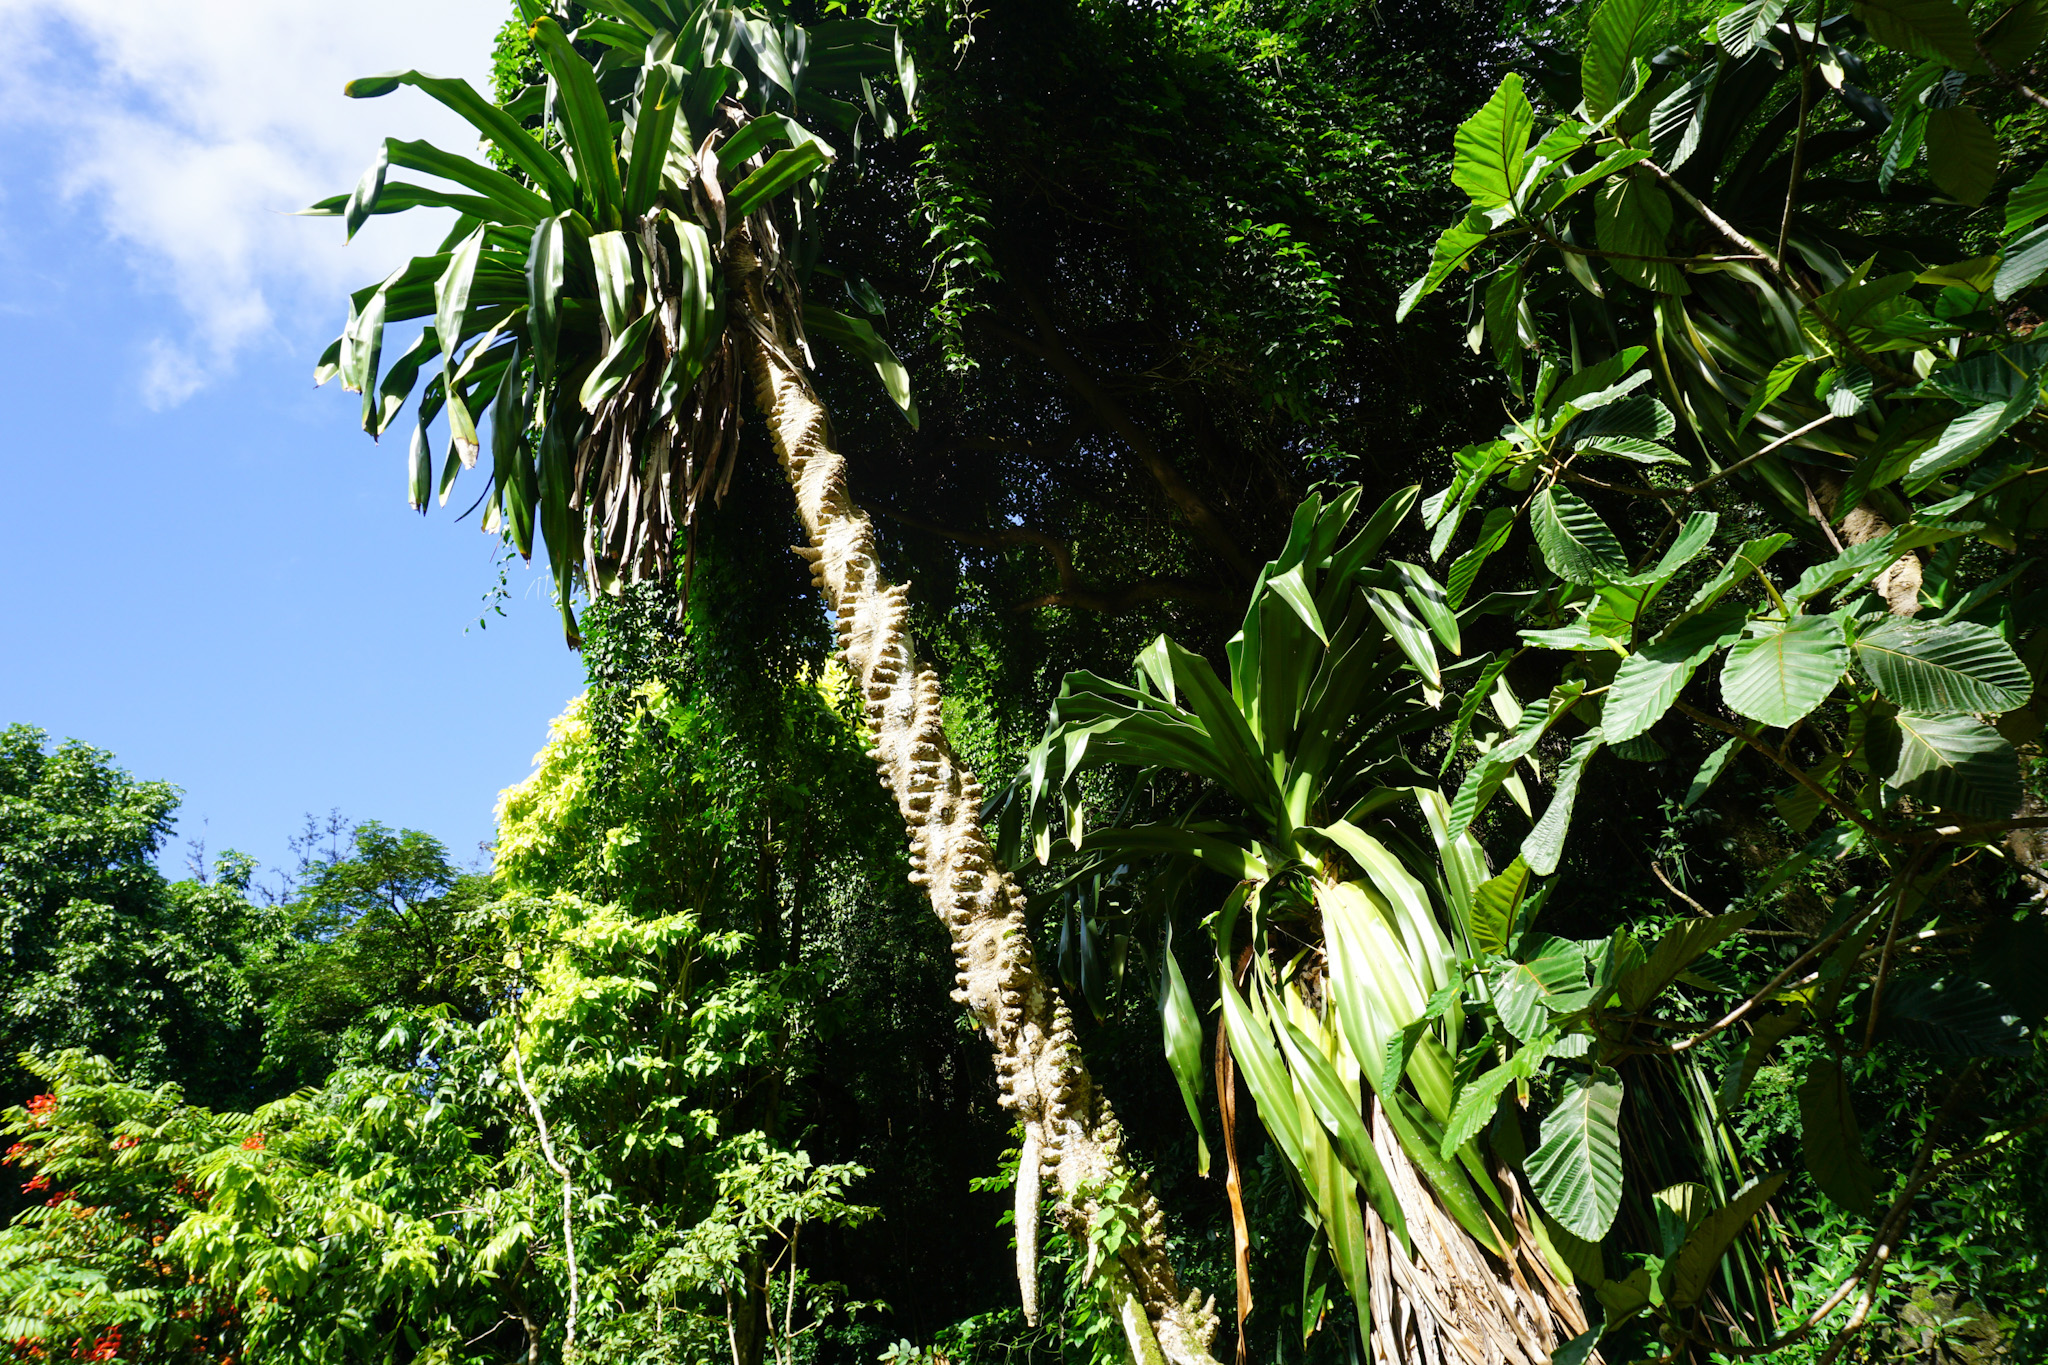 Unique palm tree with spiral tree trunk